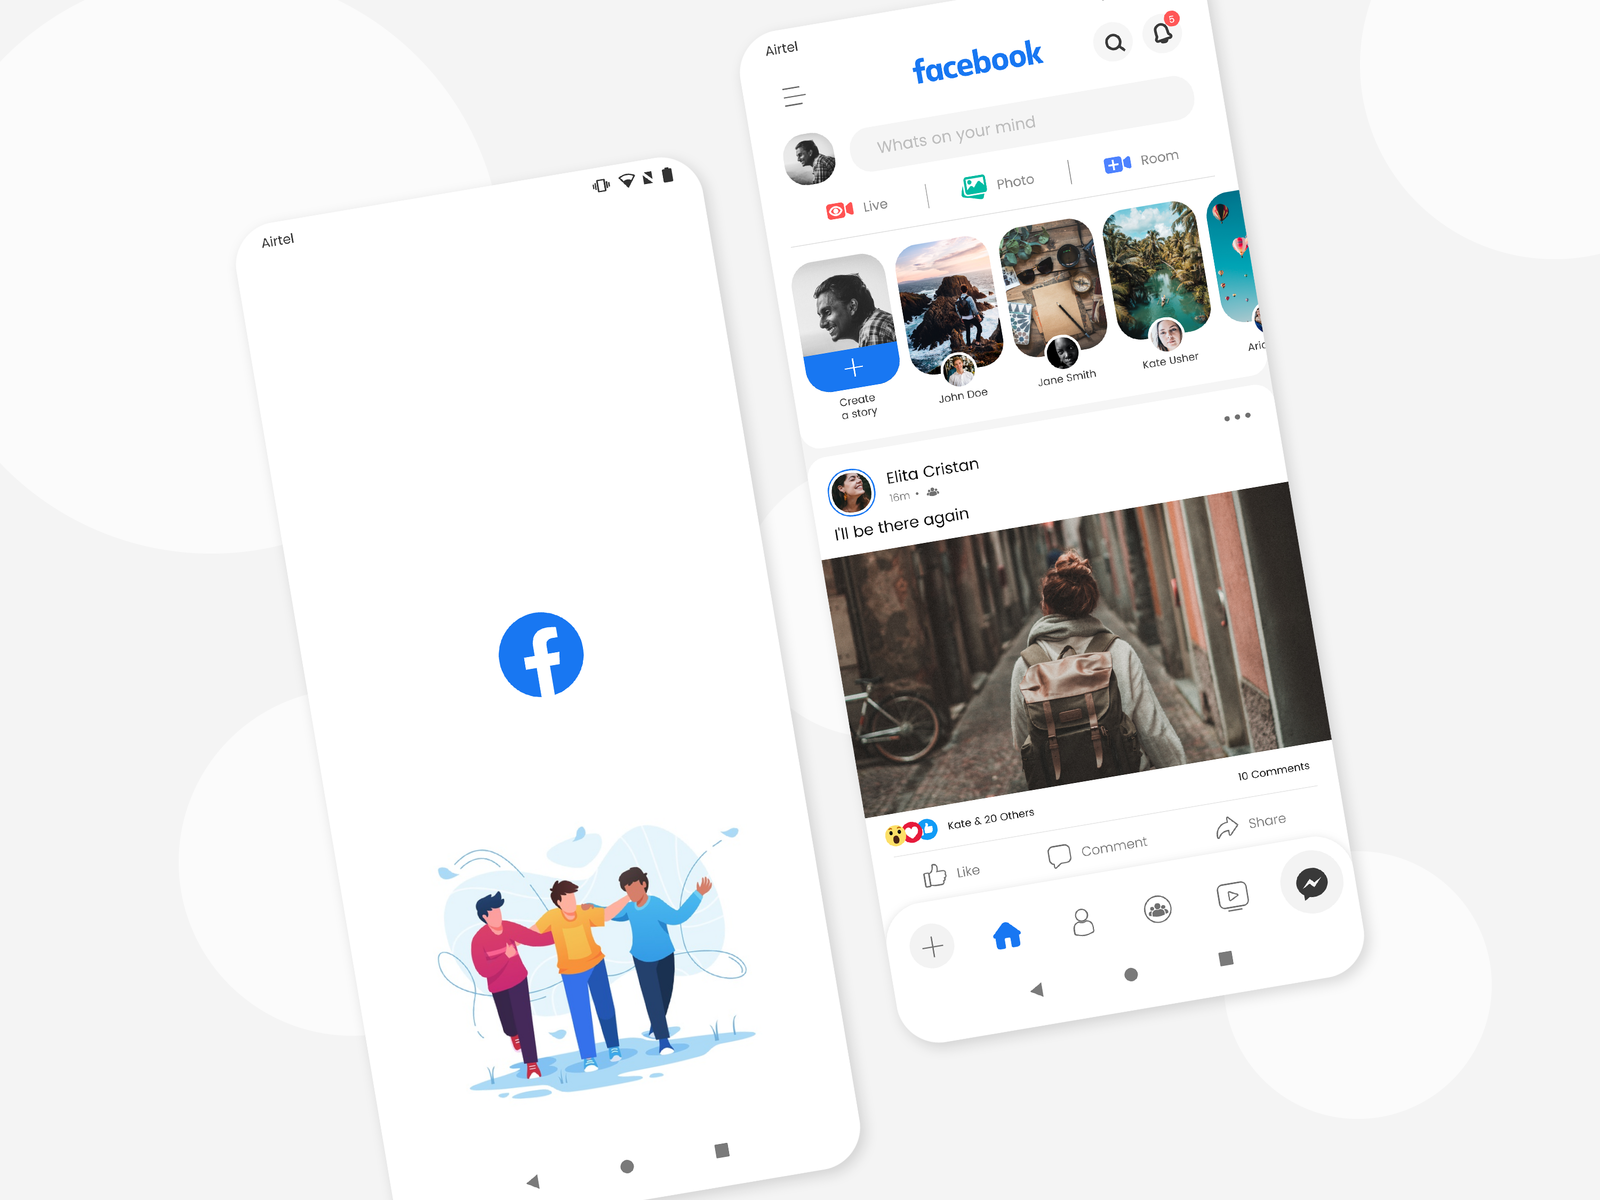 Facebook Login Redesign by Mashate Ayoub on Dribbble